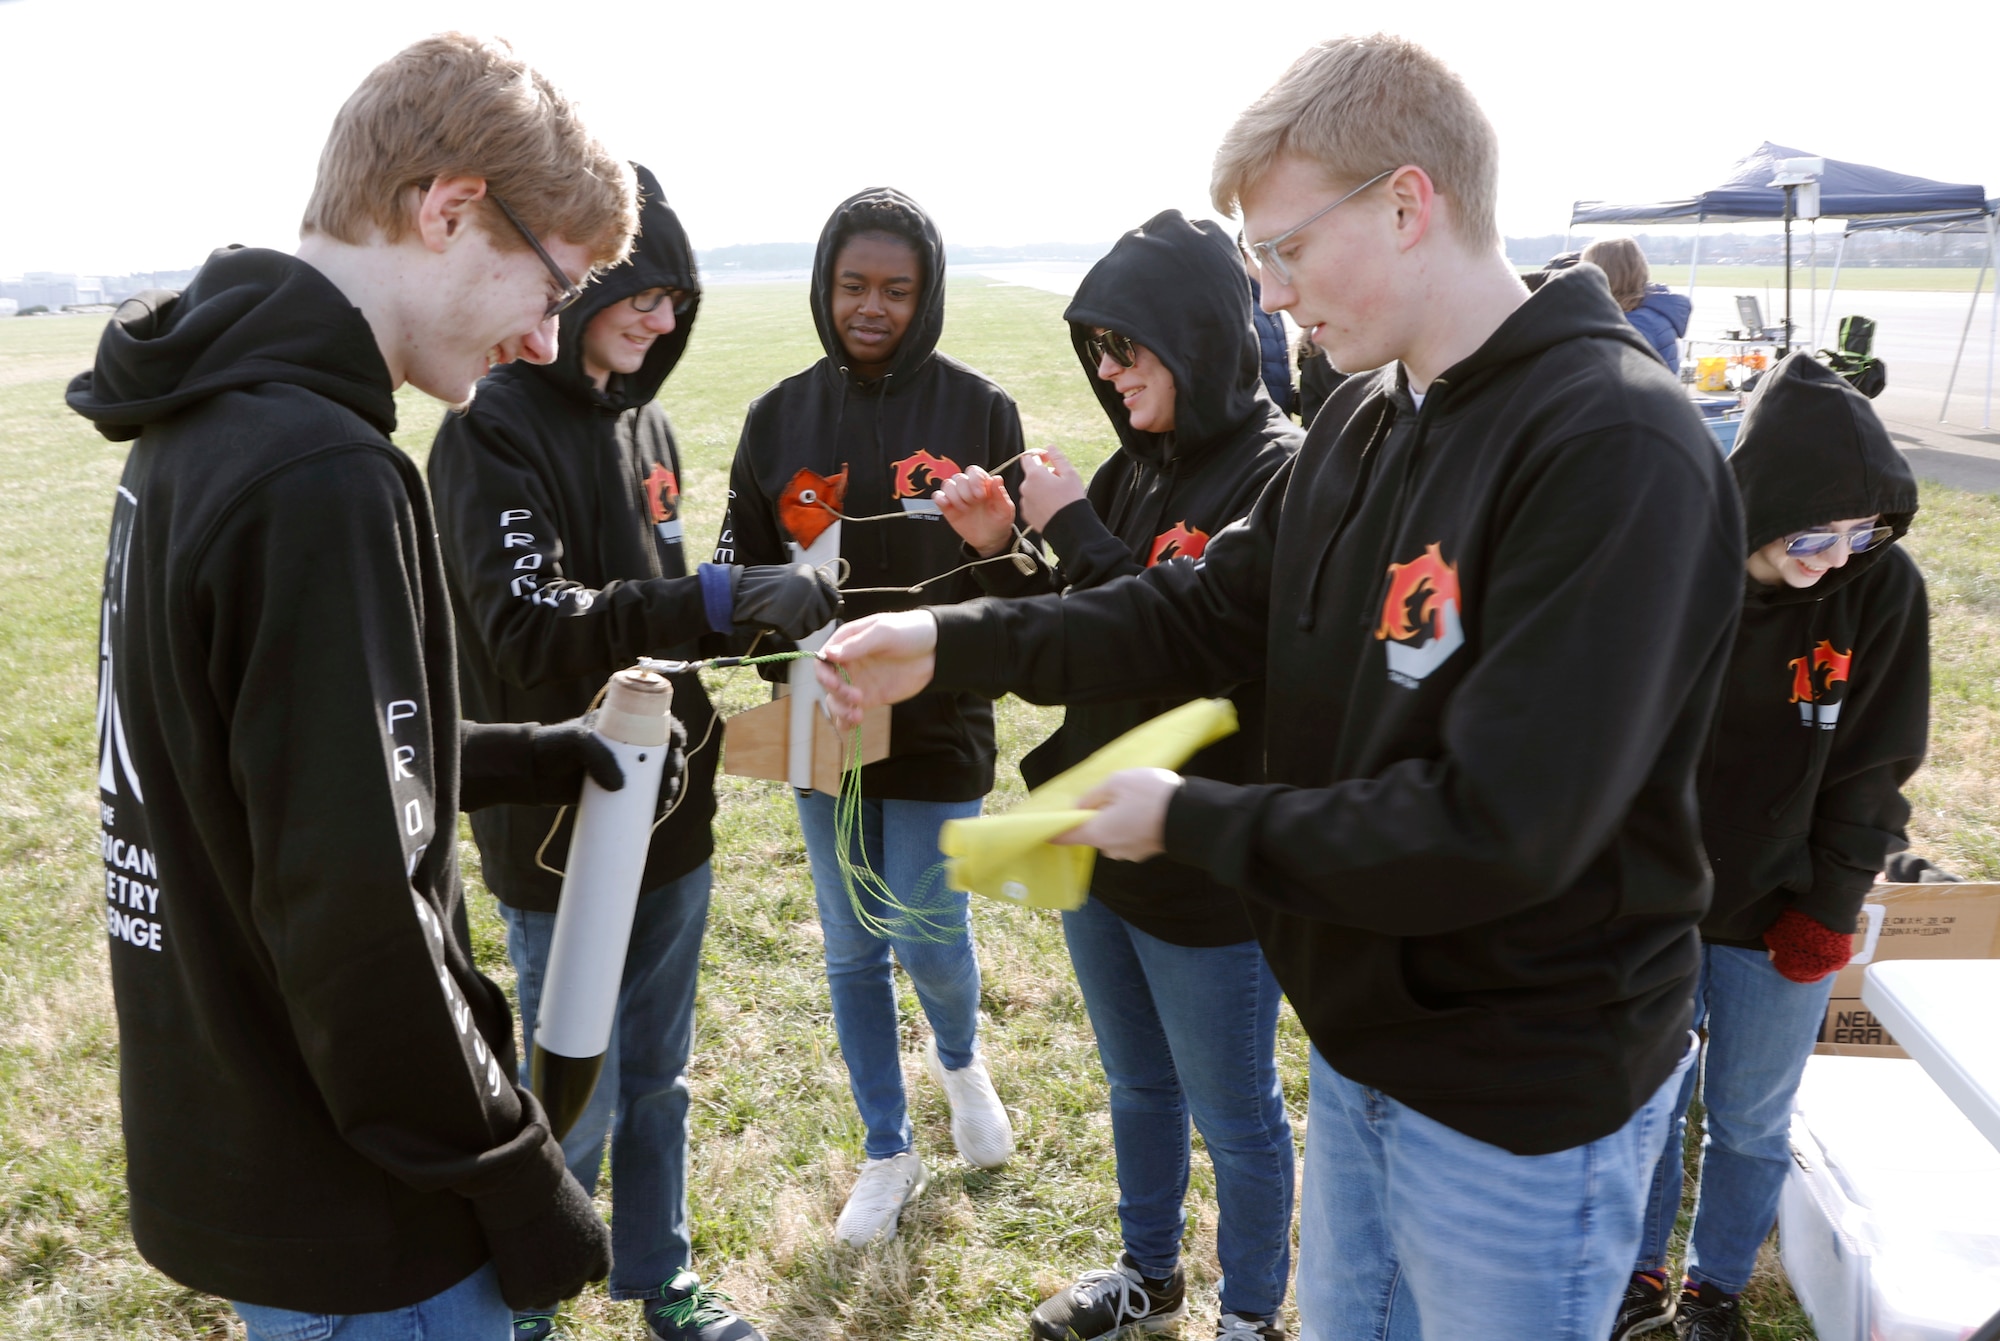 A rocketry team from the National Museum of the U.S. Air Force has advanced to The American Rocketry Challenge National Finals to be held near Washington, D.C. on Saturday, May 14.